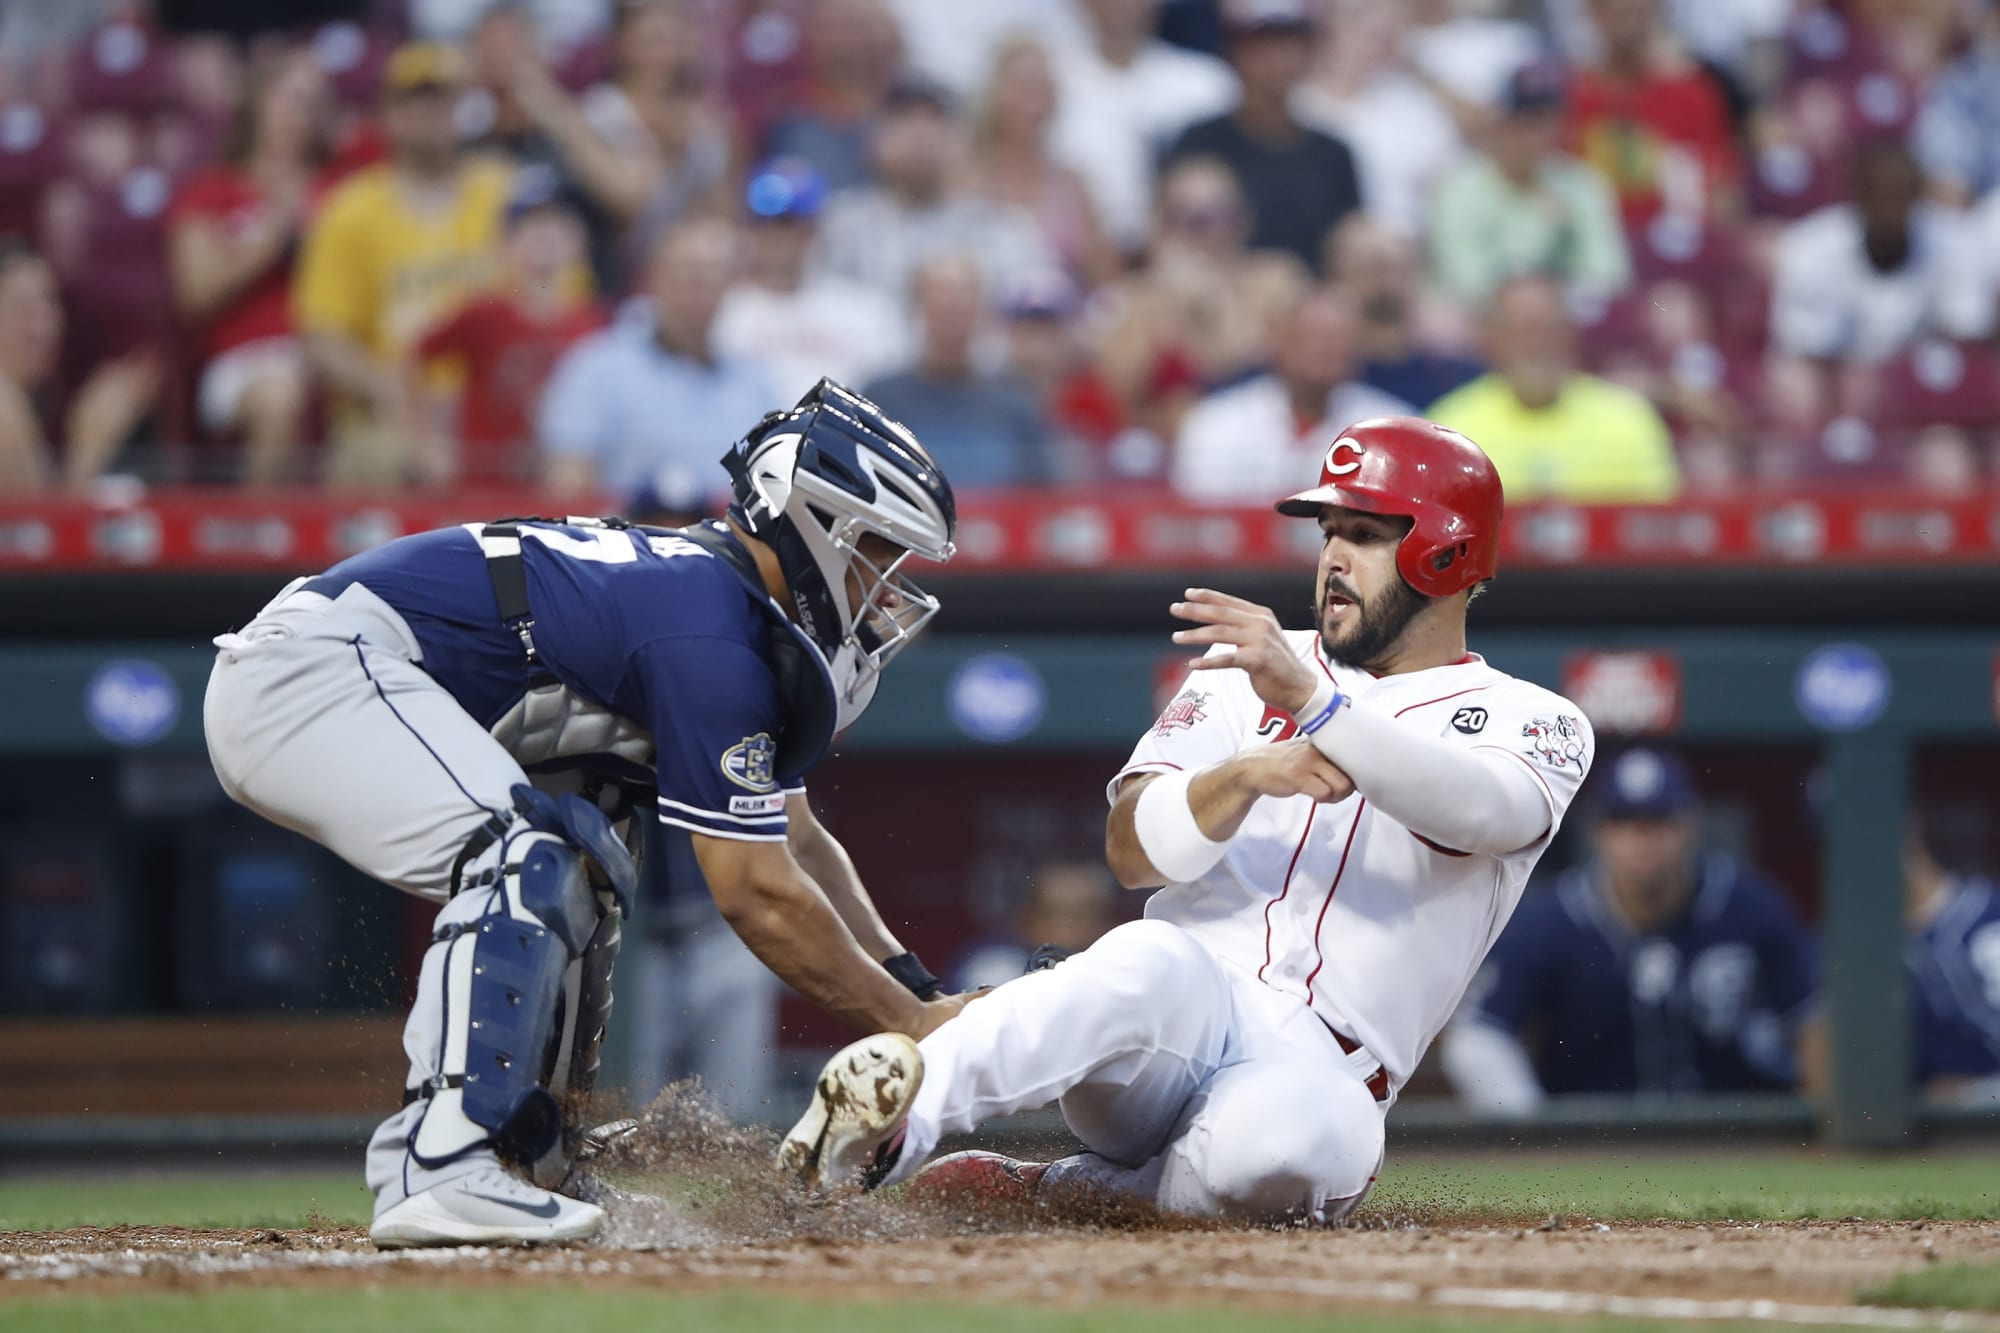 San Diego Padres escape ninthinning scare with a win at Reds